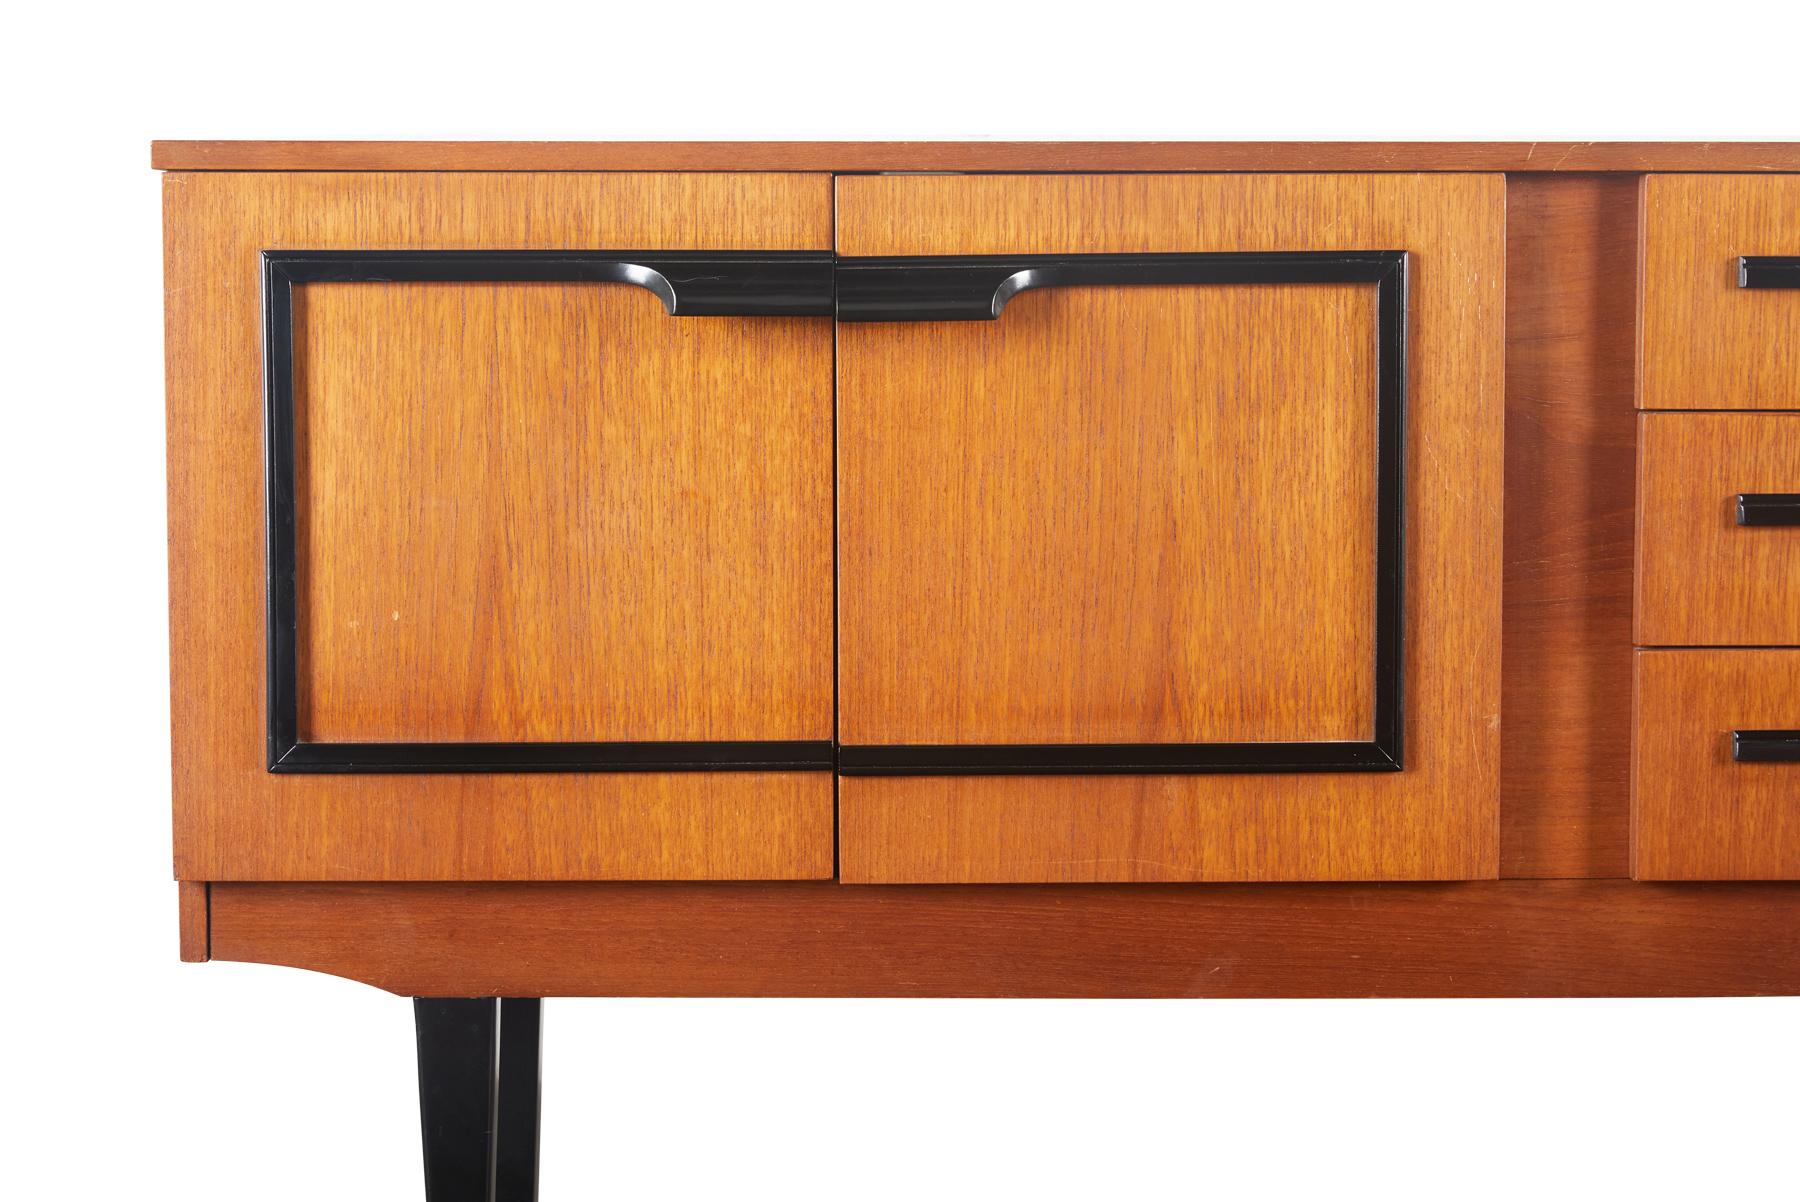 English Modern Midcentury Credenza in Teak with Black Lacquer Accents For Sale 3